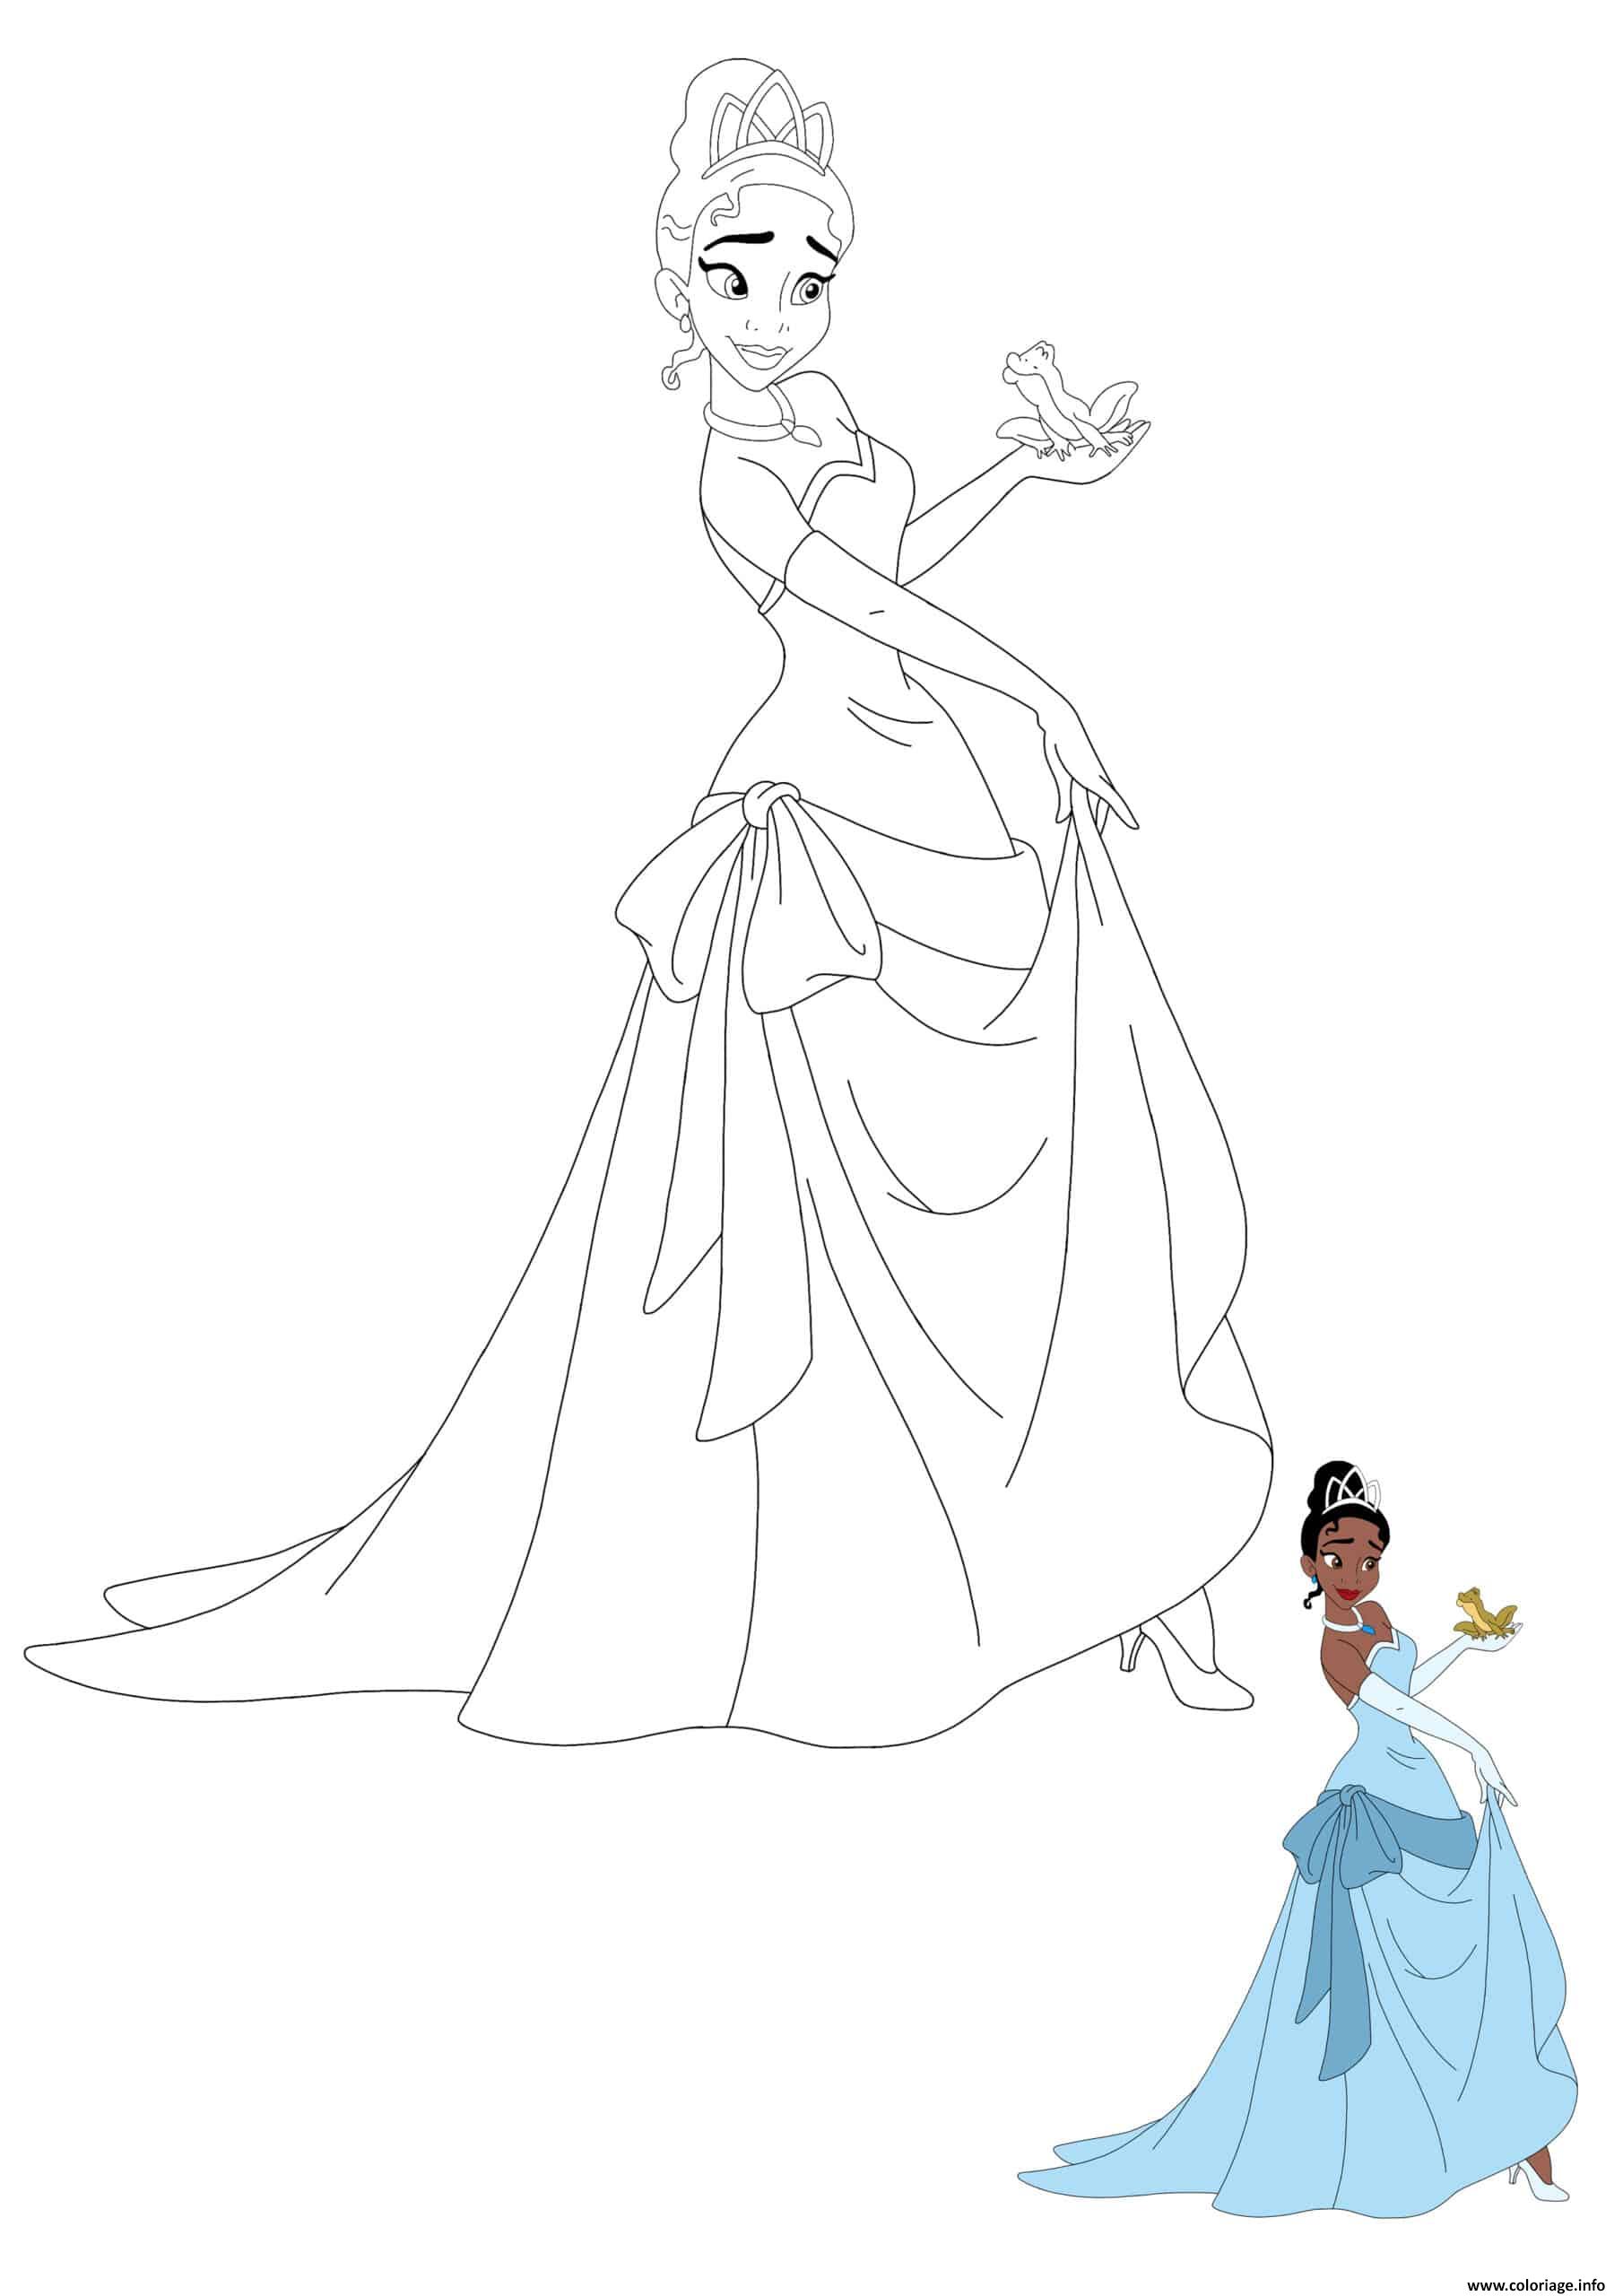 Coloriage Princesse Tiana And Prince Naveen As A Frog Dessin à Imprimer